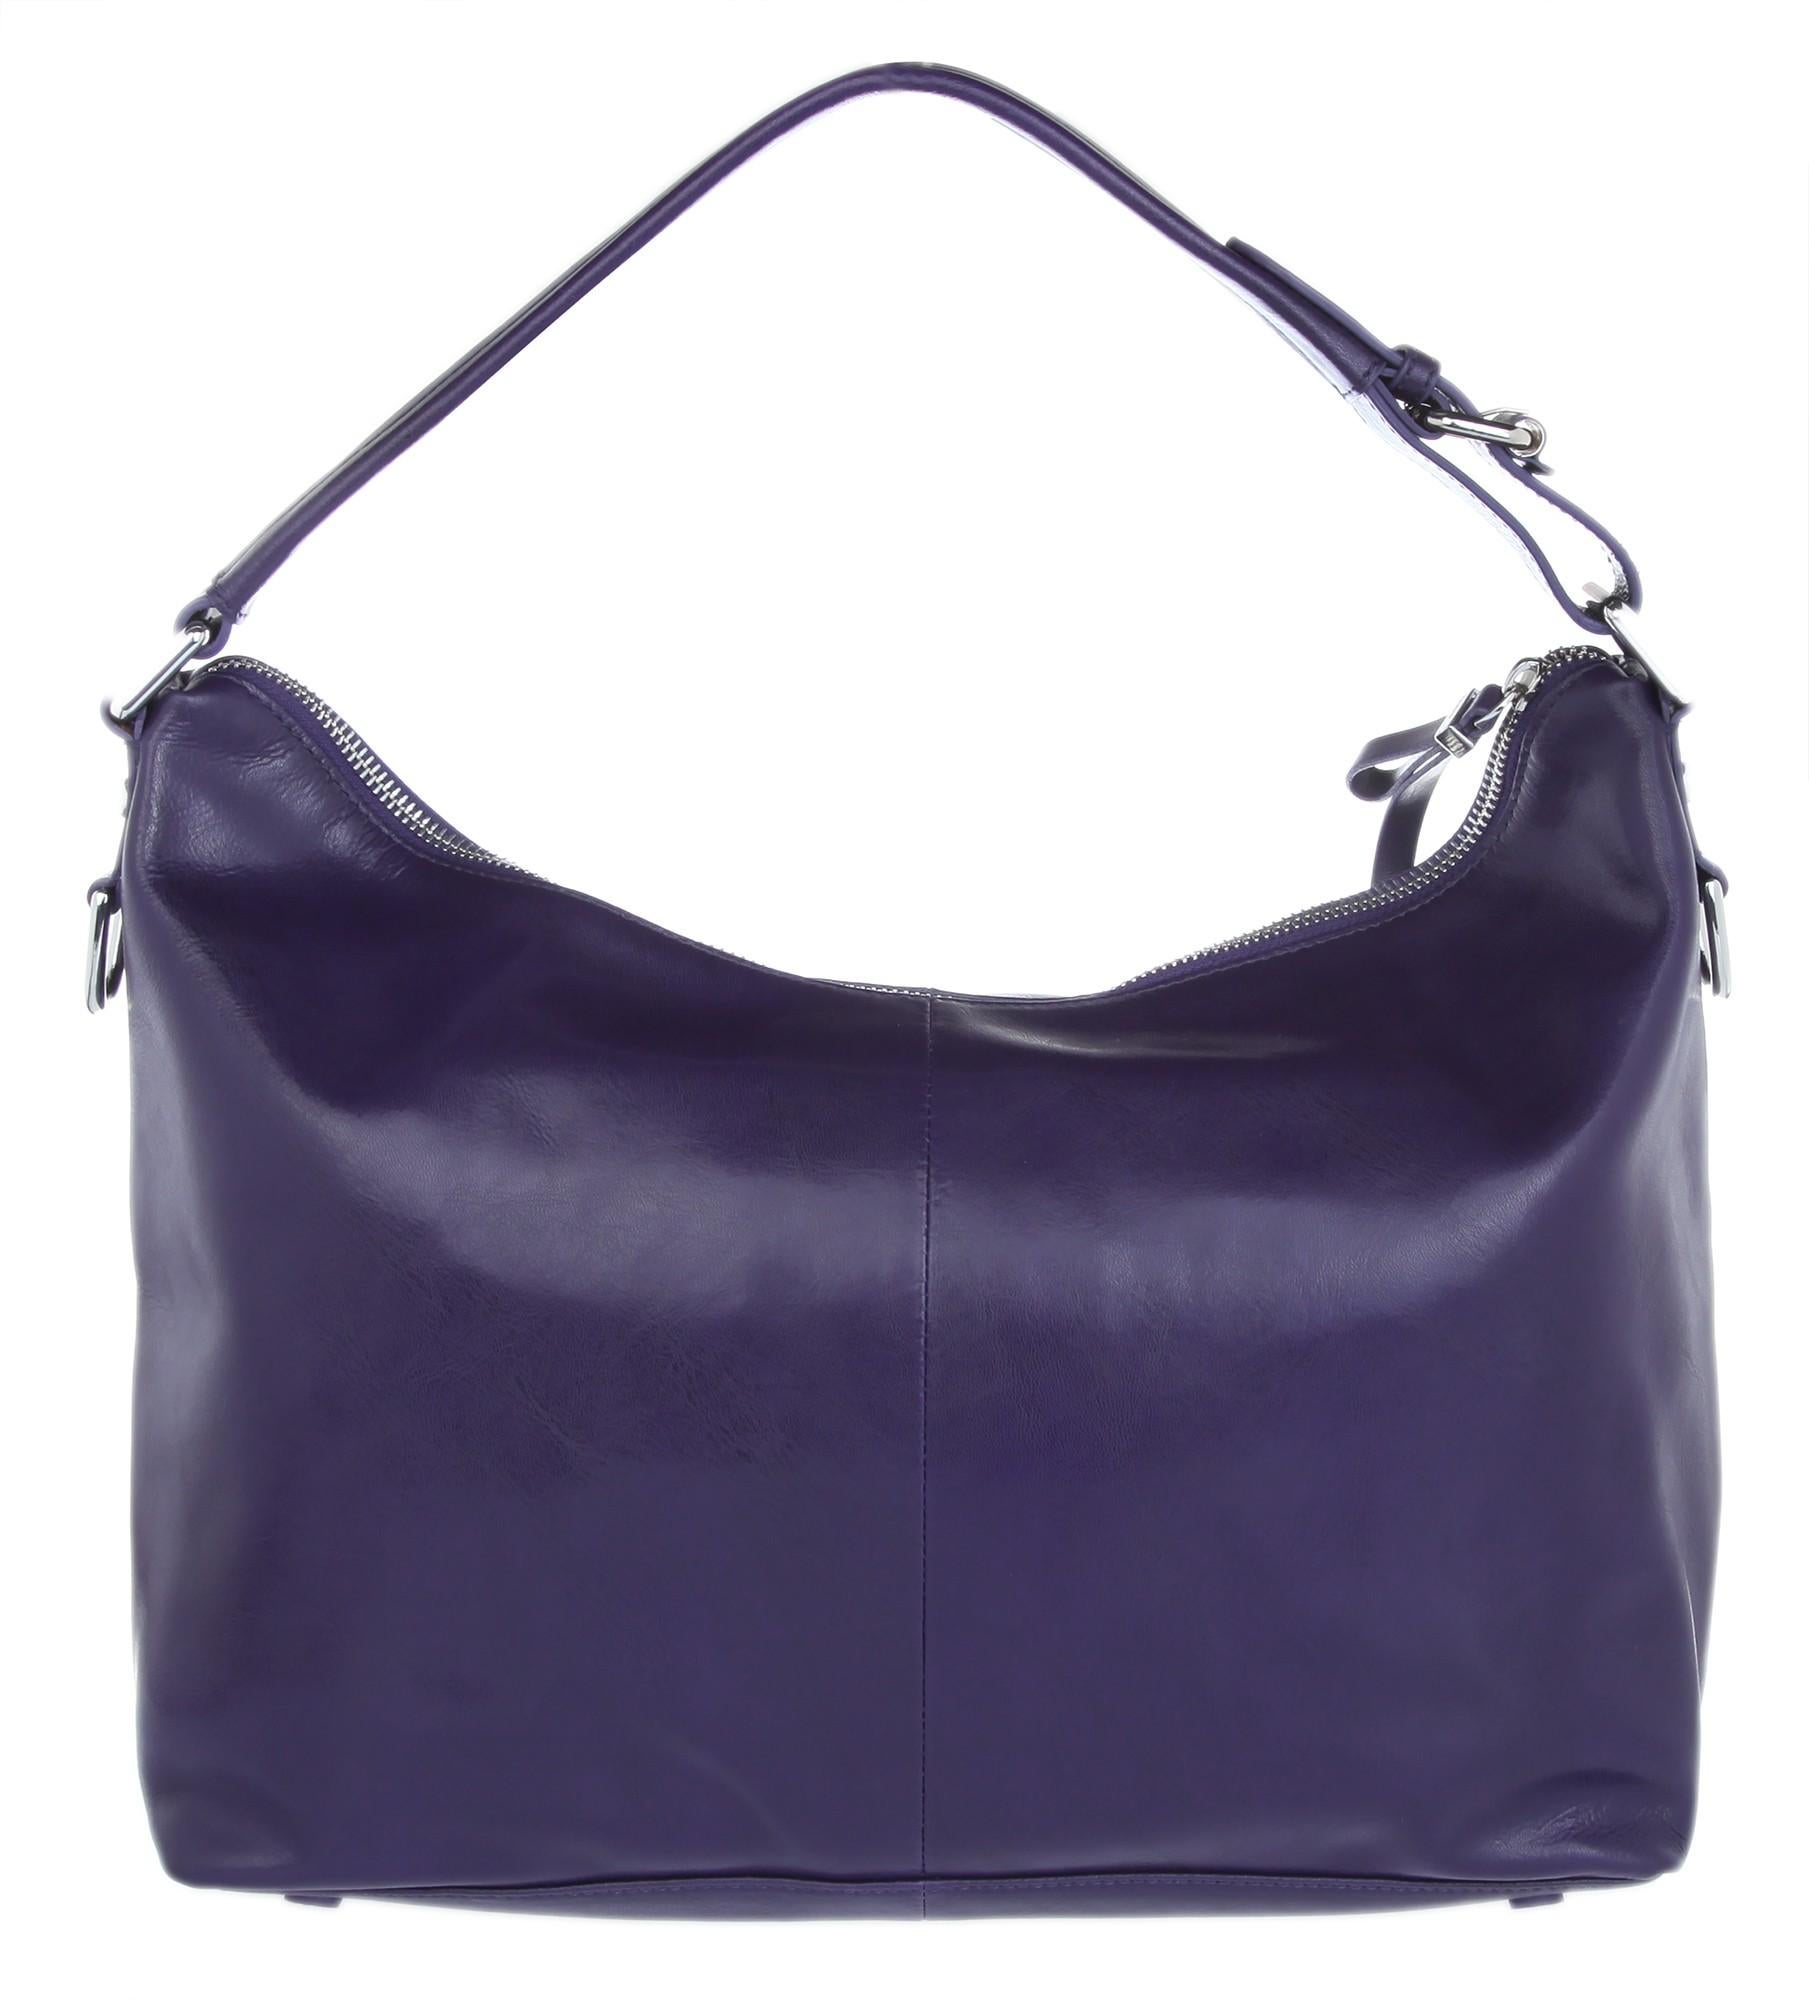 Item number: UX5BJI-U625
Color: purple
Material Exterior: leather
Lining: 100% polyester
Shoulder strap with 23cm drop
Product Dimenions: widht 33 cm, high 24 cm, depth 9 cm
Compartments: 1 main compartment, 1 zipper pocket, 2 pockets, Exterior: 1